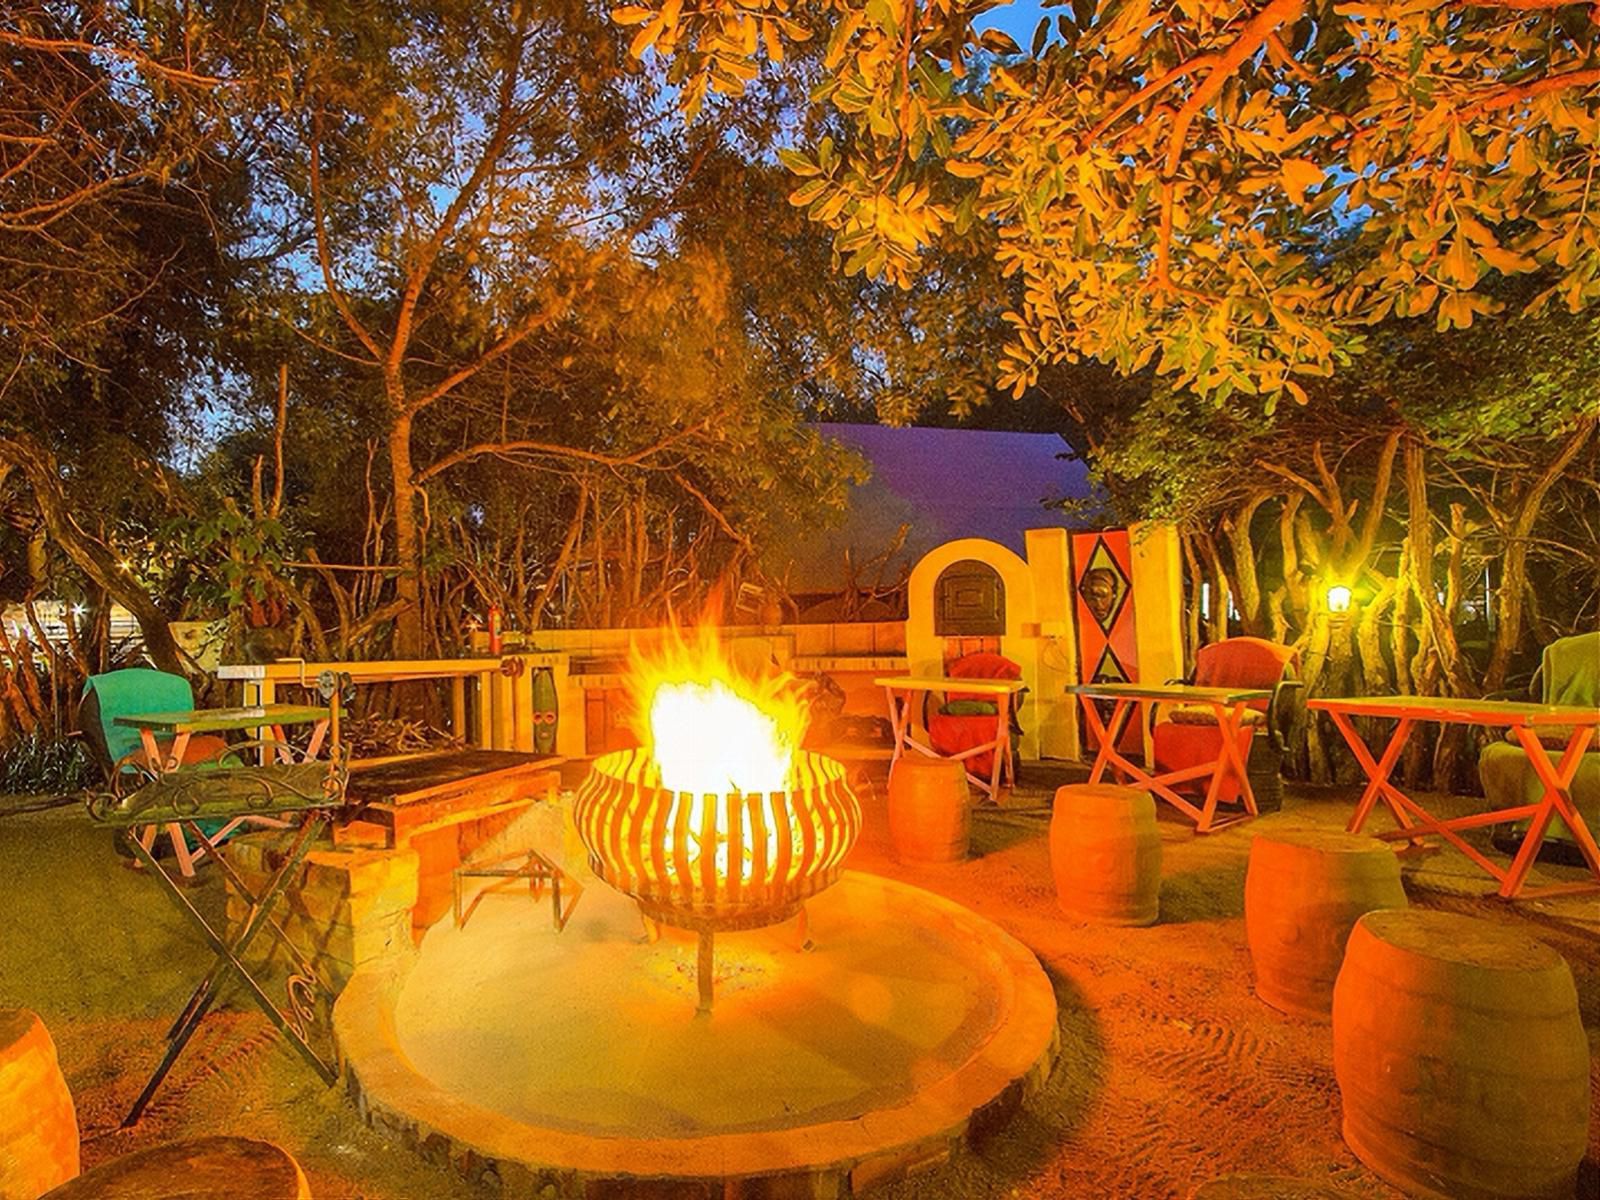 Kruger Wielewaal Rest Camp Marloth Park Mpumalanga South Africa Colorful, Fire, Nature